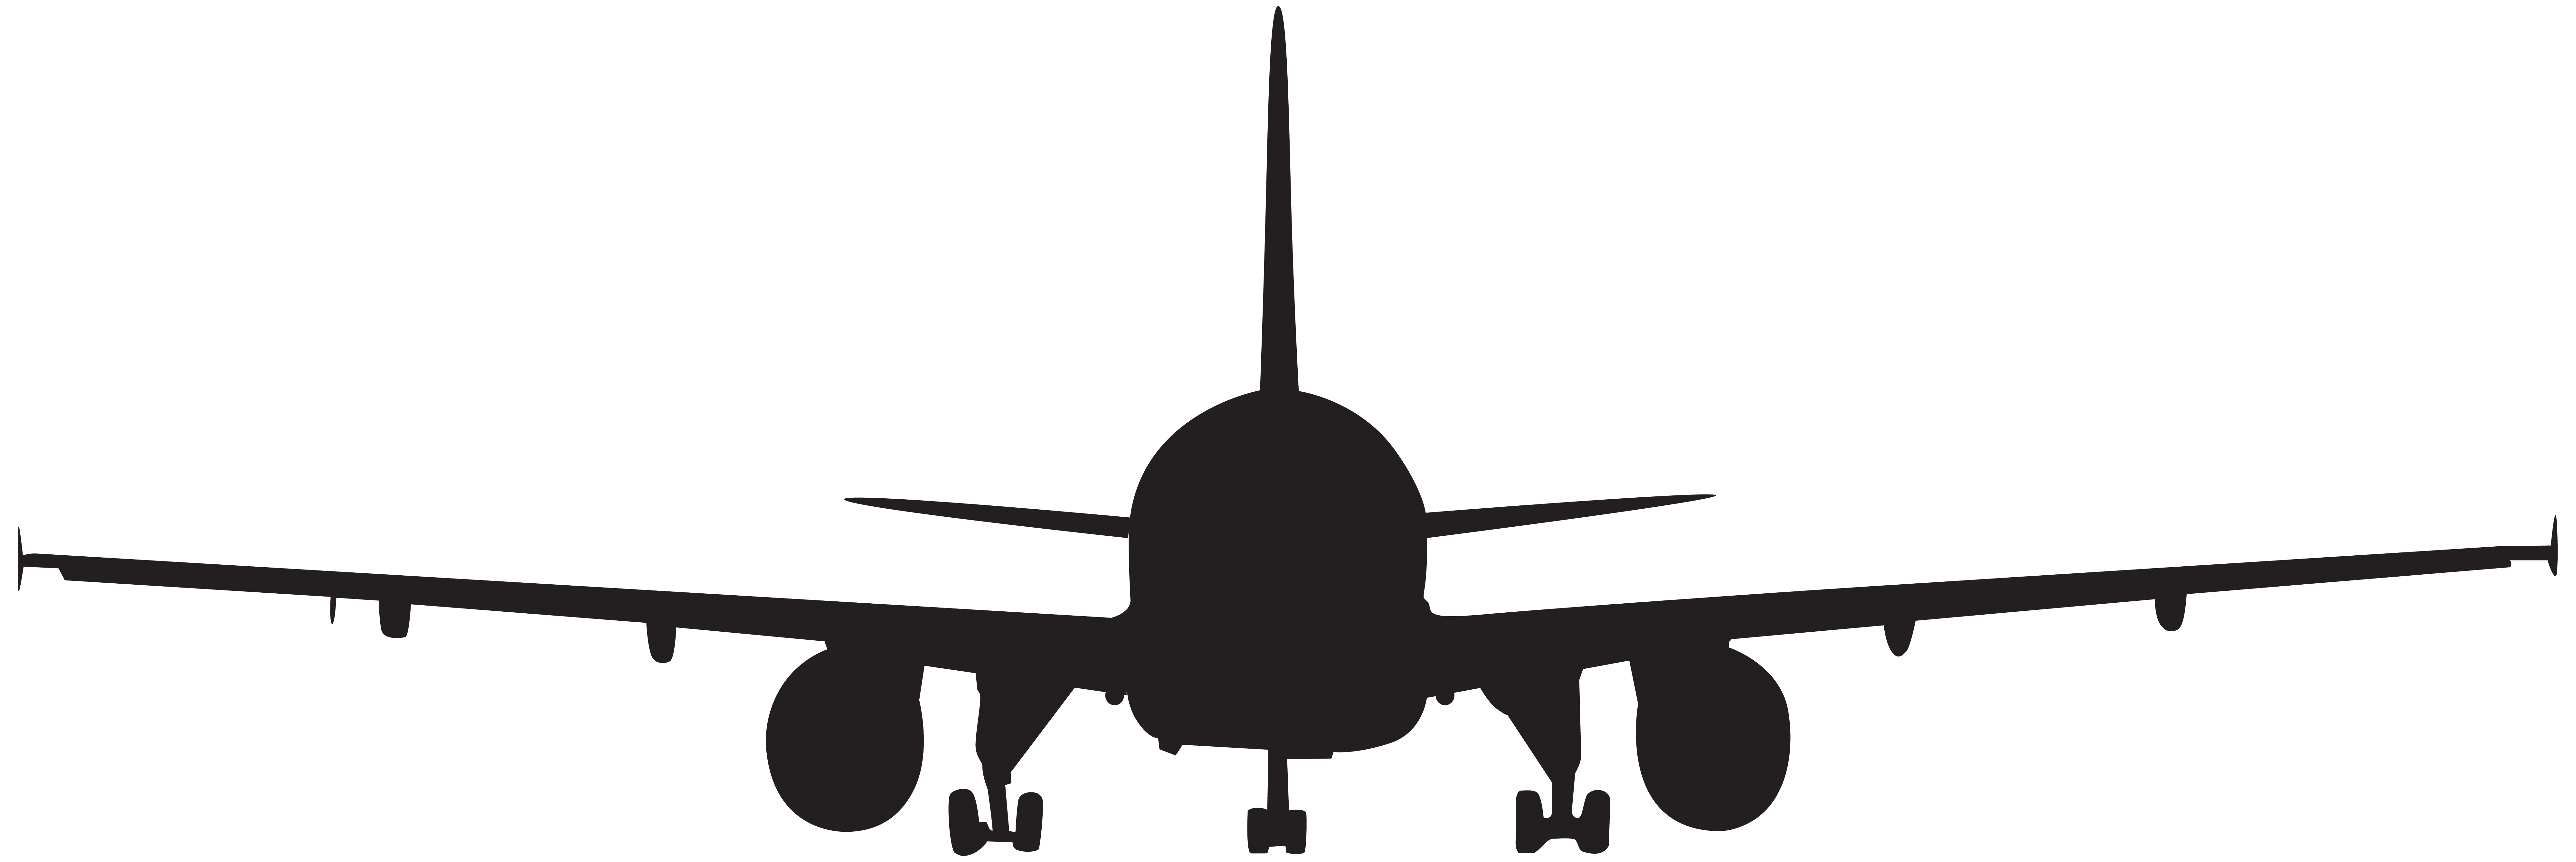 Aircraft Silhouette at GetDrawings.com | Free for personal use ...